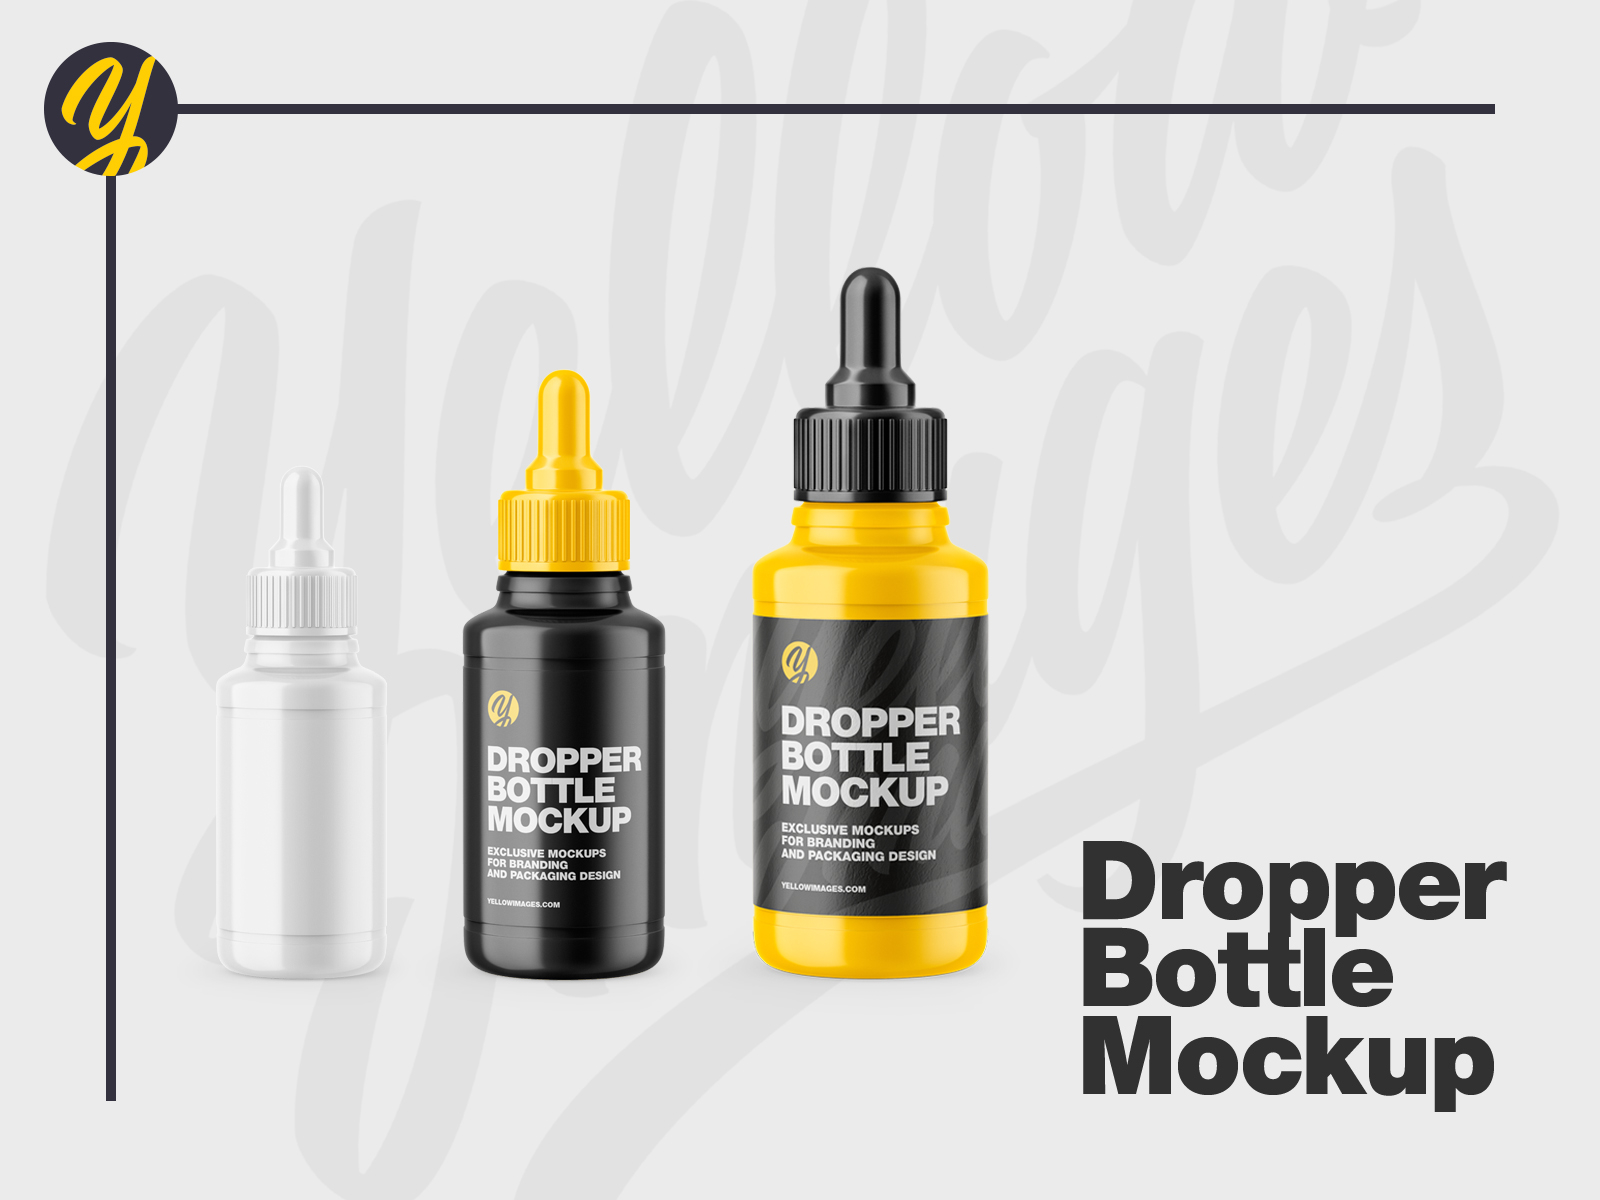 Download Dropper Bottle Mockup By Yellow Roma On Dribbble Yellowimages Mockups